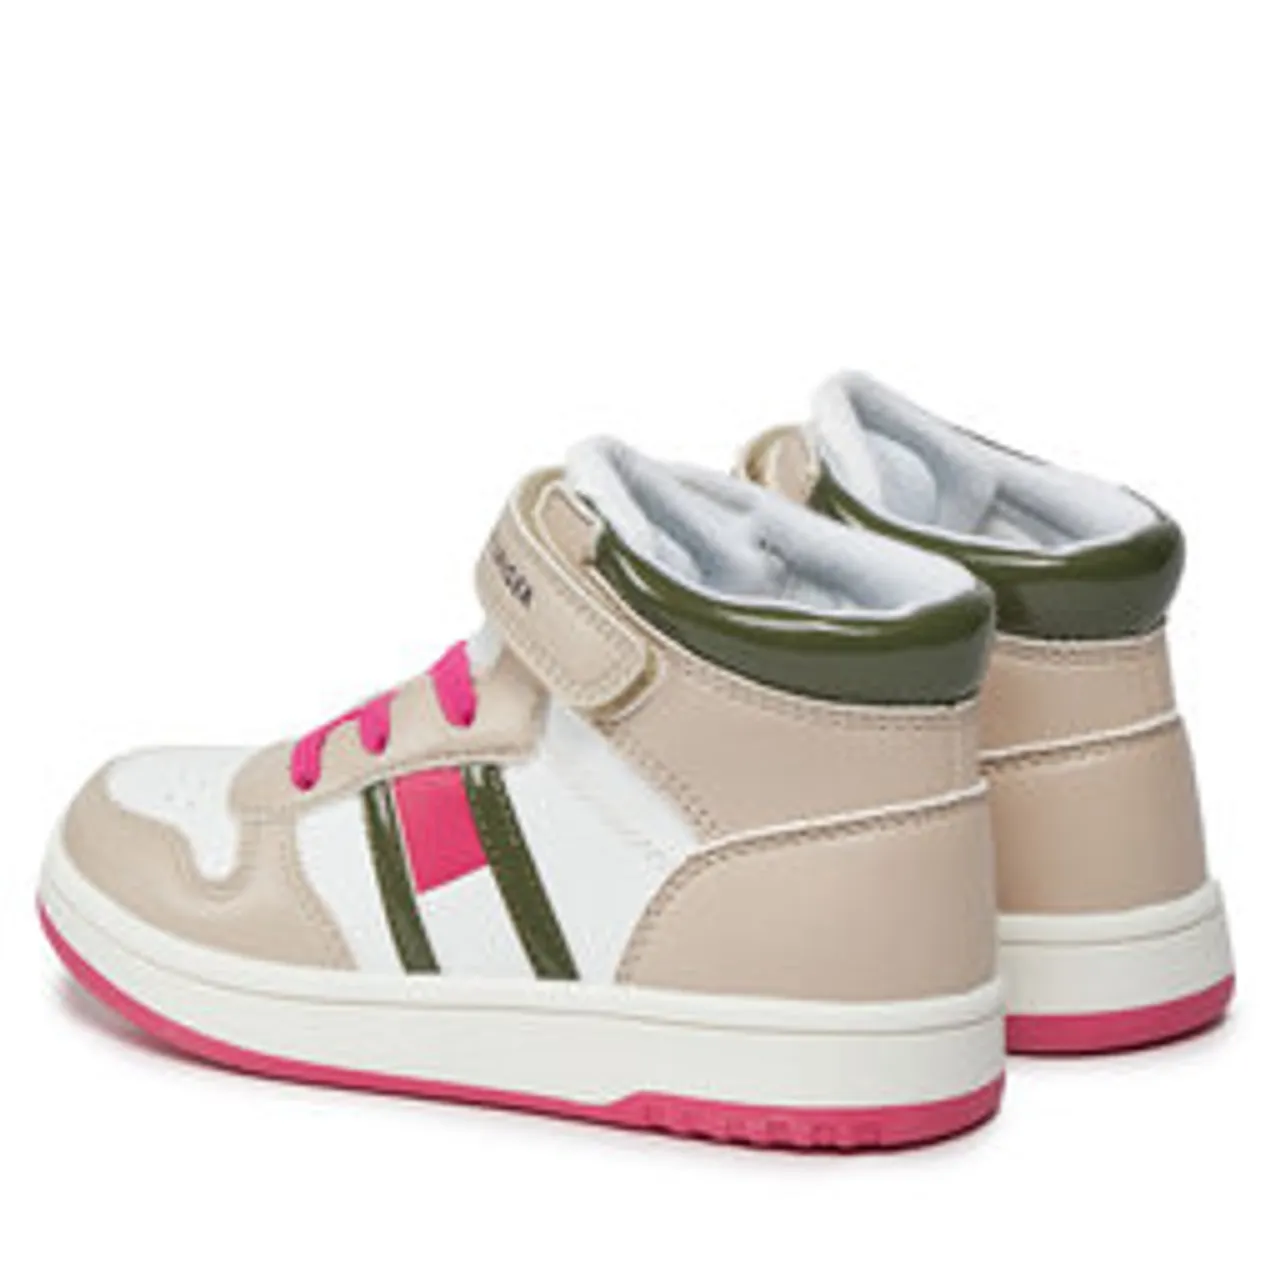 Sneakers Tommy Hilfiger T3A9-32961-1434Y609 S Beige/Off White/Army Green Y609